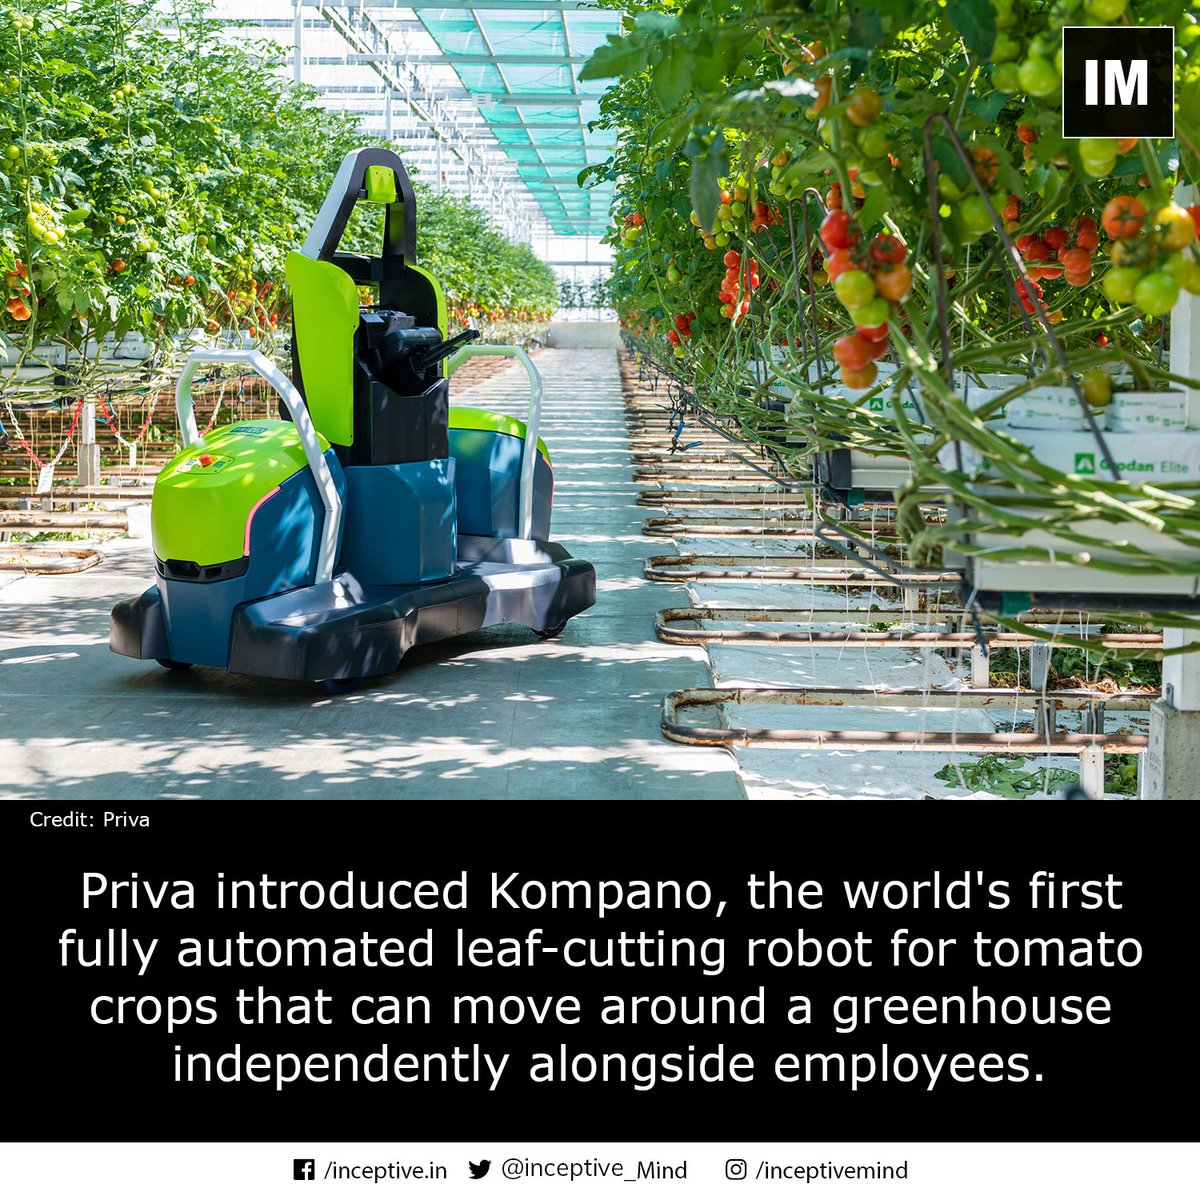 Priva’s fully automated leaf-cutting robot can operate 24/7.
#leafcutting #robot #fullyautomated #kompano #innovation #newinvention #newtechnology #inceptivemind